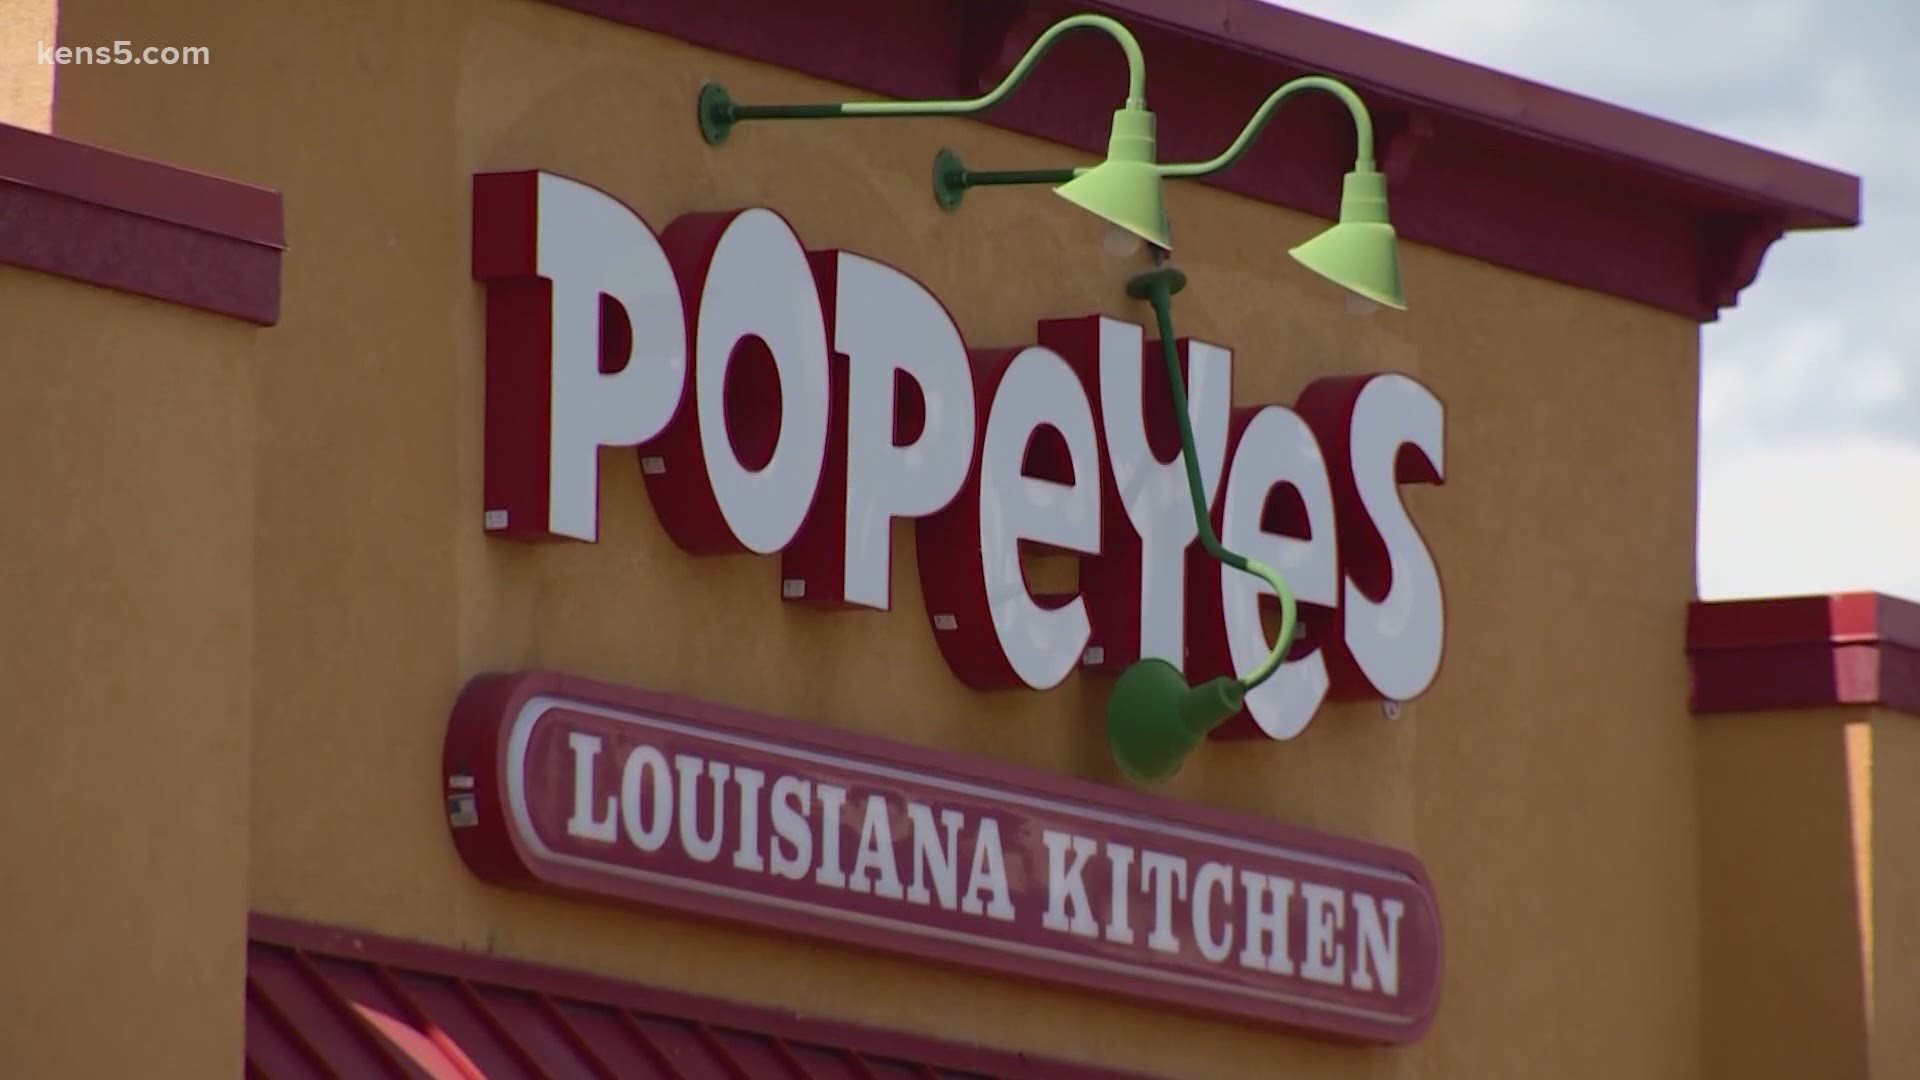 Popeyes Chicken said it terminated a San Antonio employee after a police officer said his meal came with a disparaging remark and saliva.